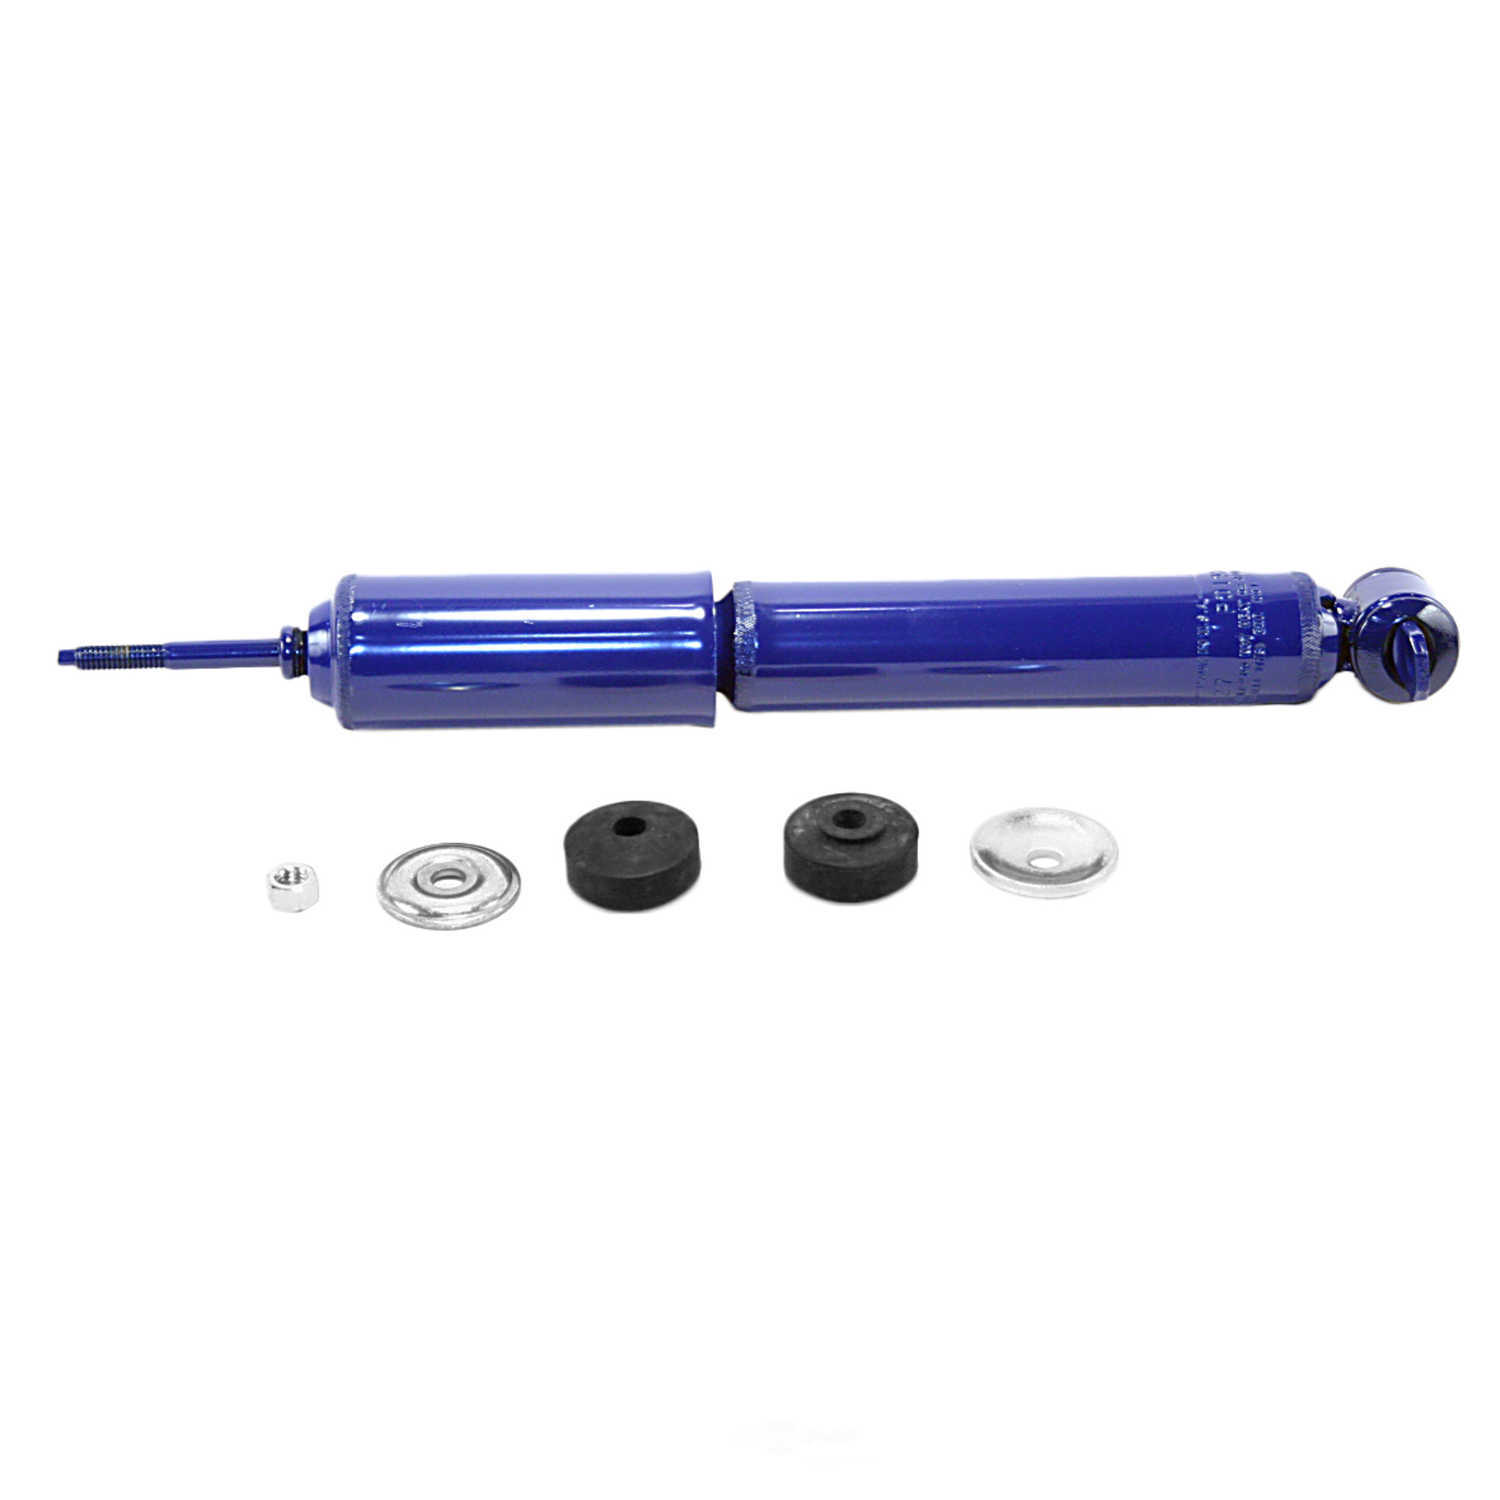 MONROE SHOCKS/STRUTS - Monro-Matic Plus Shock Absorber (With ABS Brakes, Front) - MOE 33127